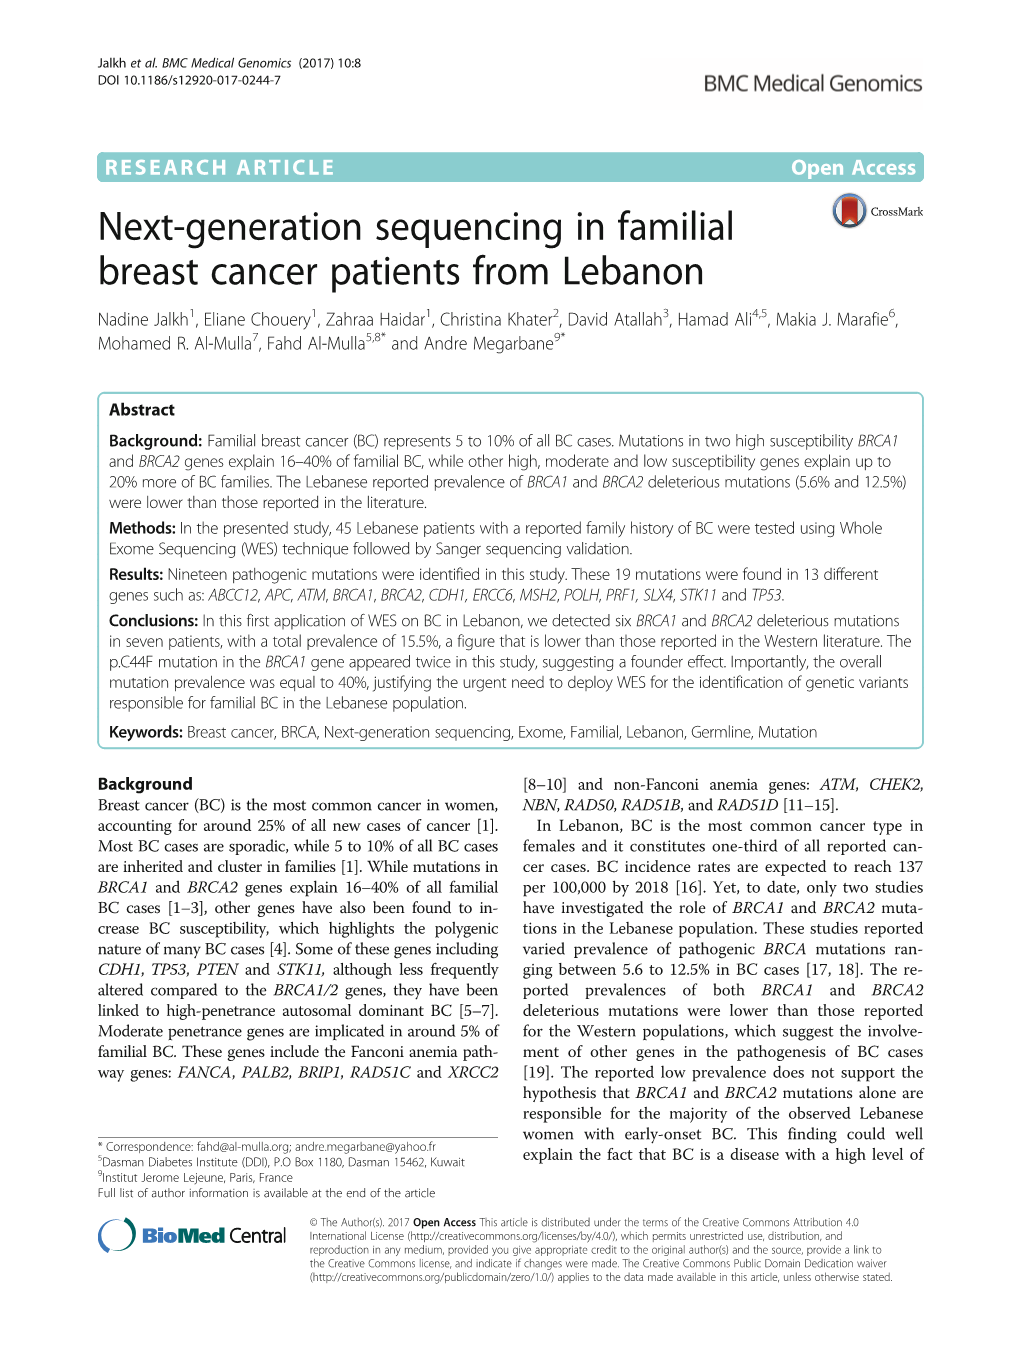 Next-Generation Sequencing in Familial Breast Cancer Patients From